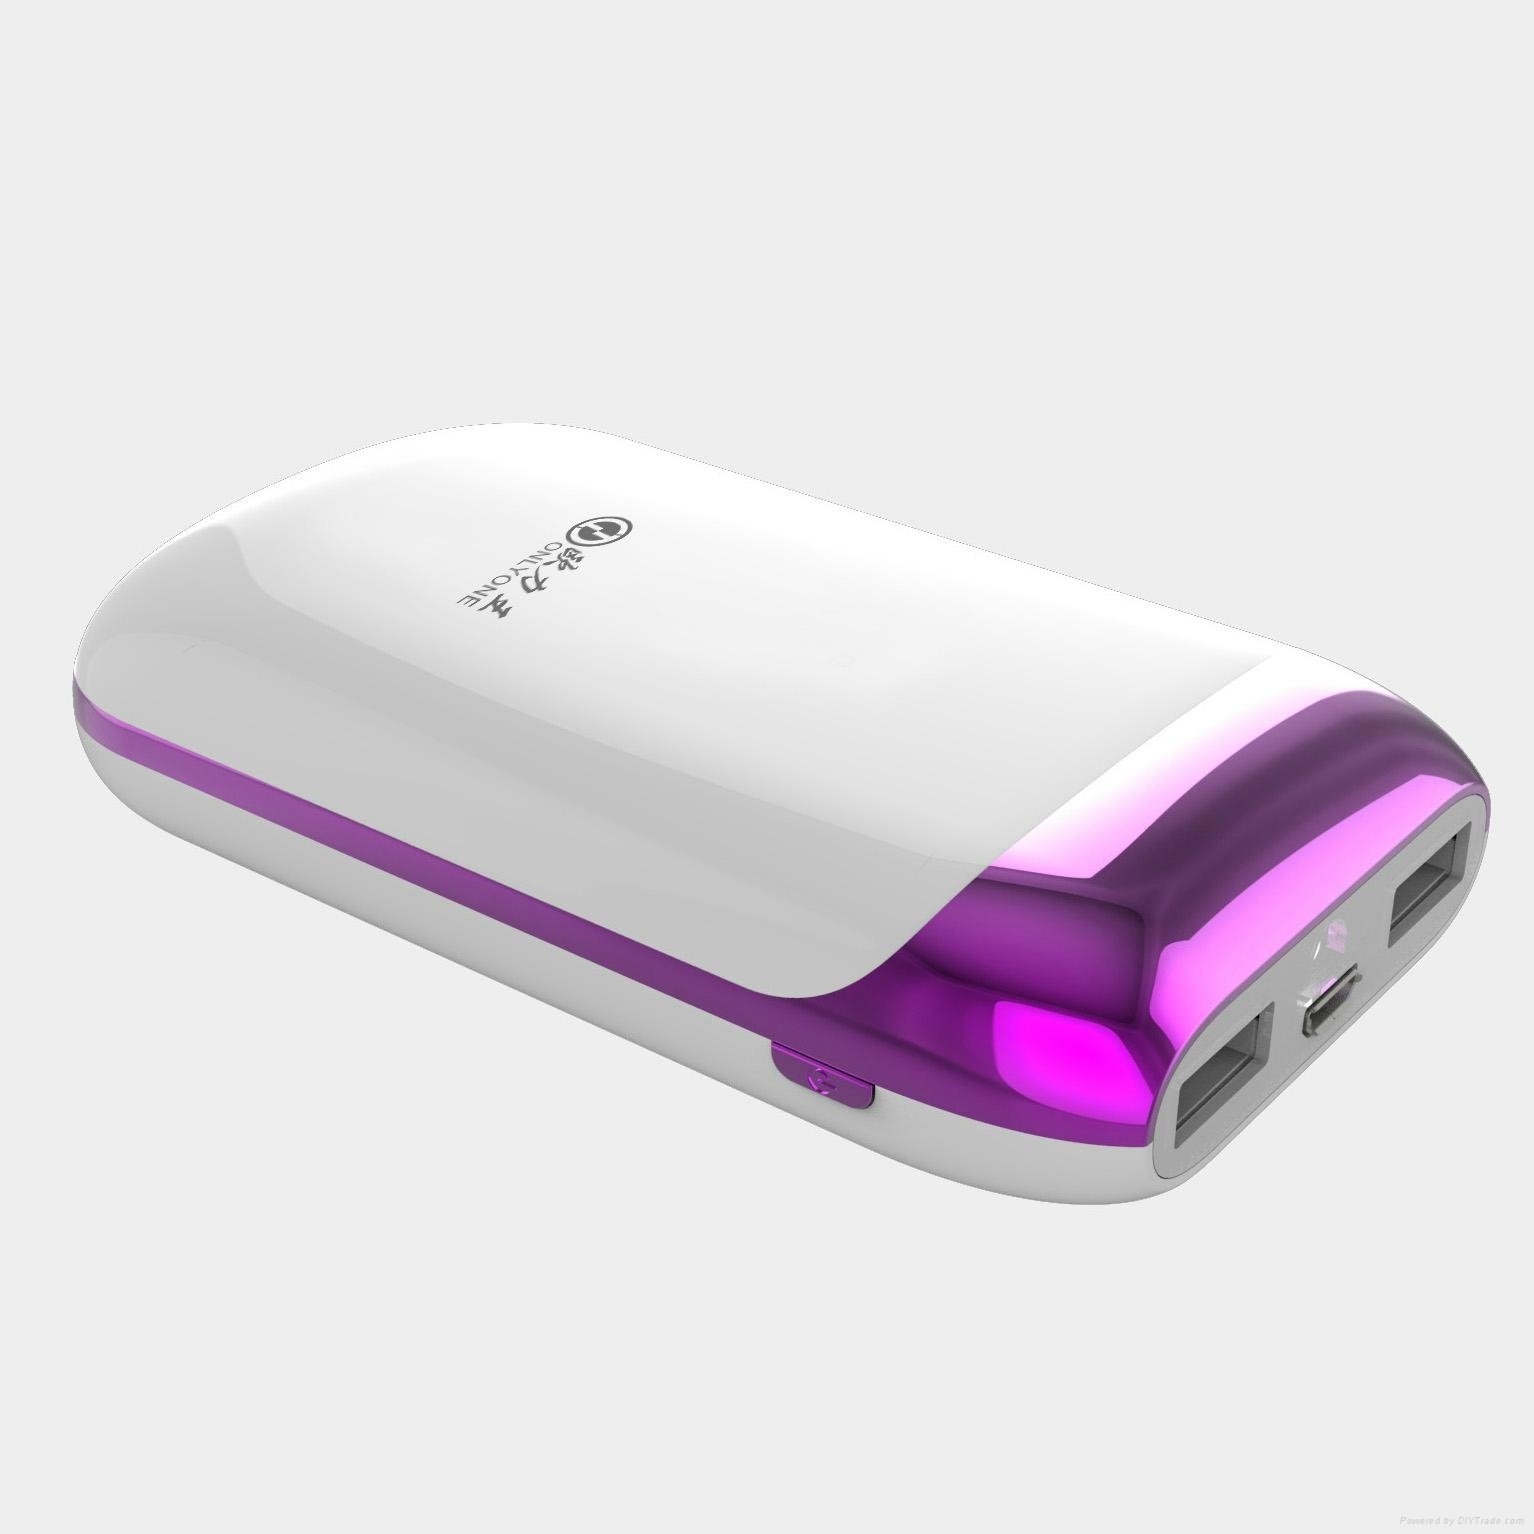 Newest rechargeable mobile phone charger dual USB output power bank 7800mah 5